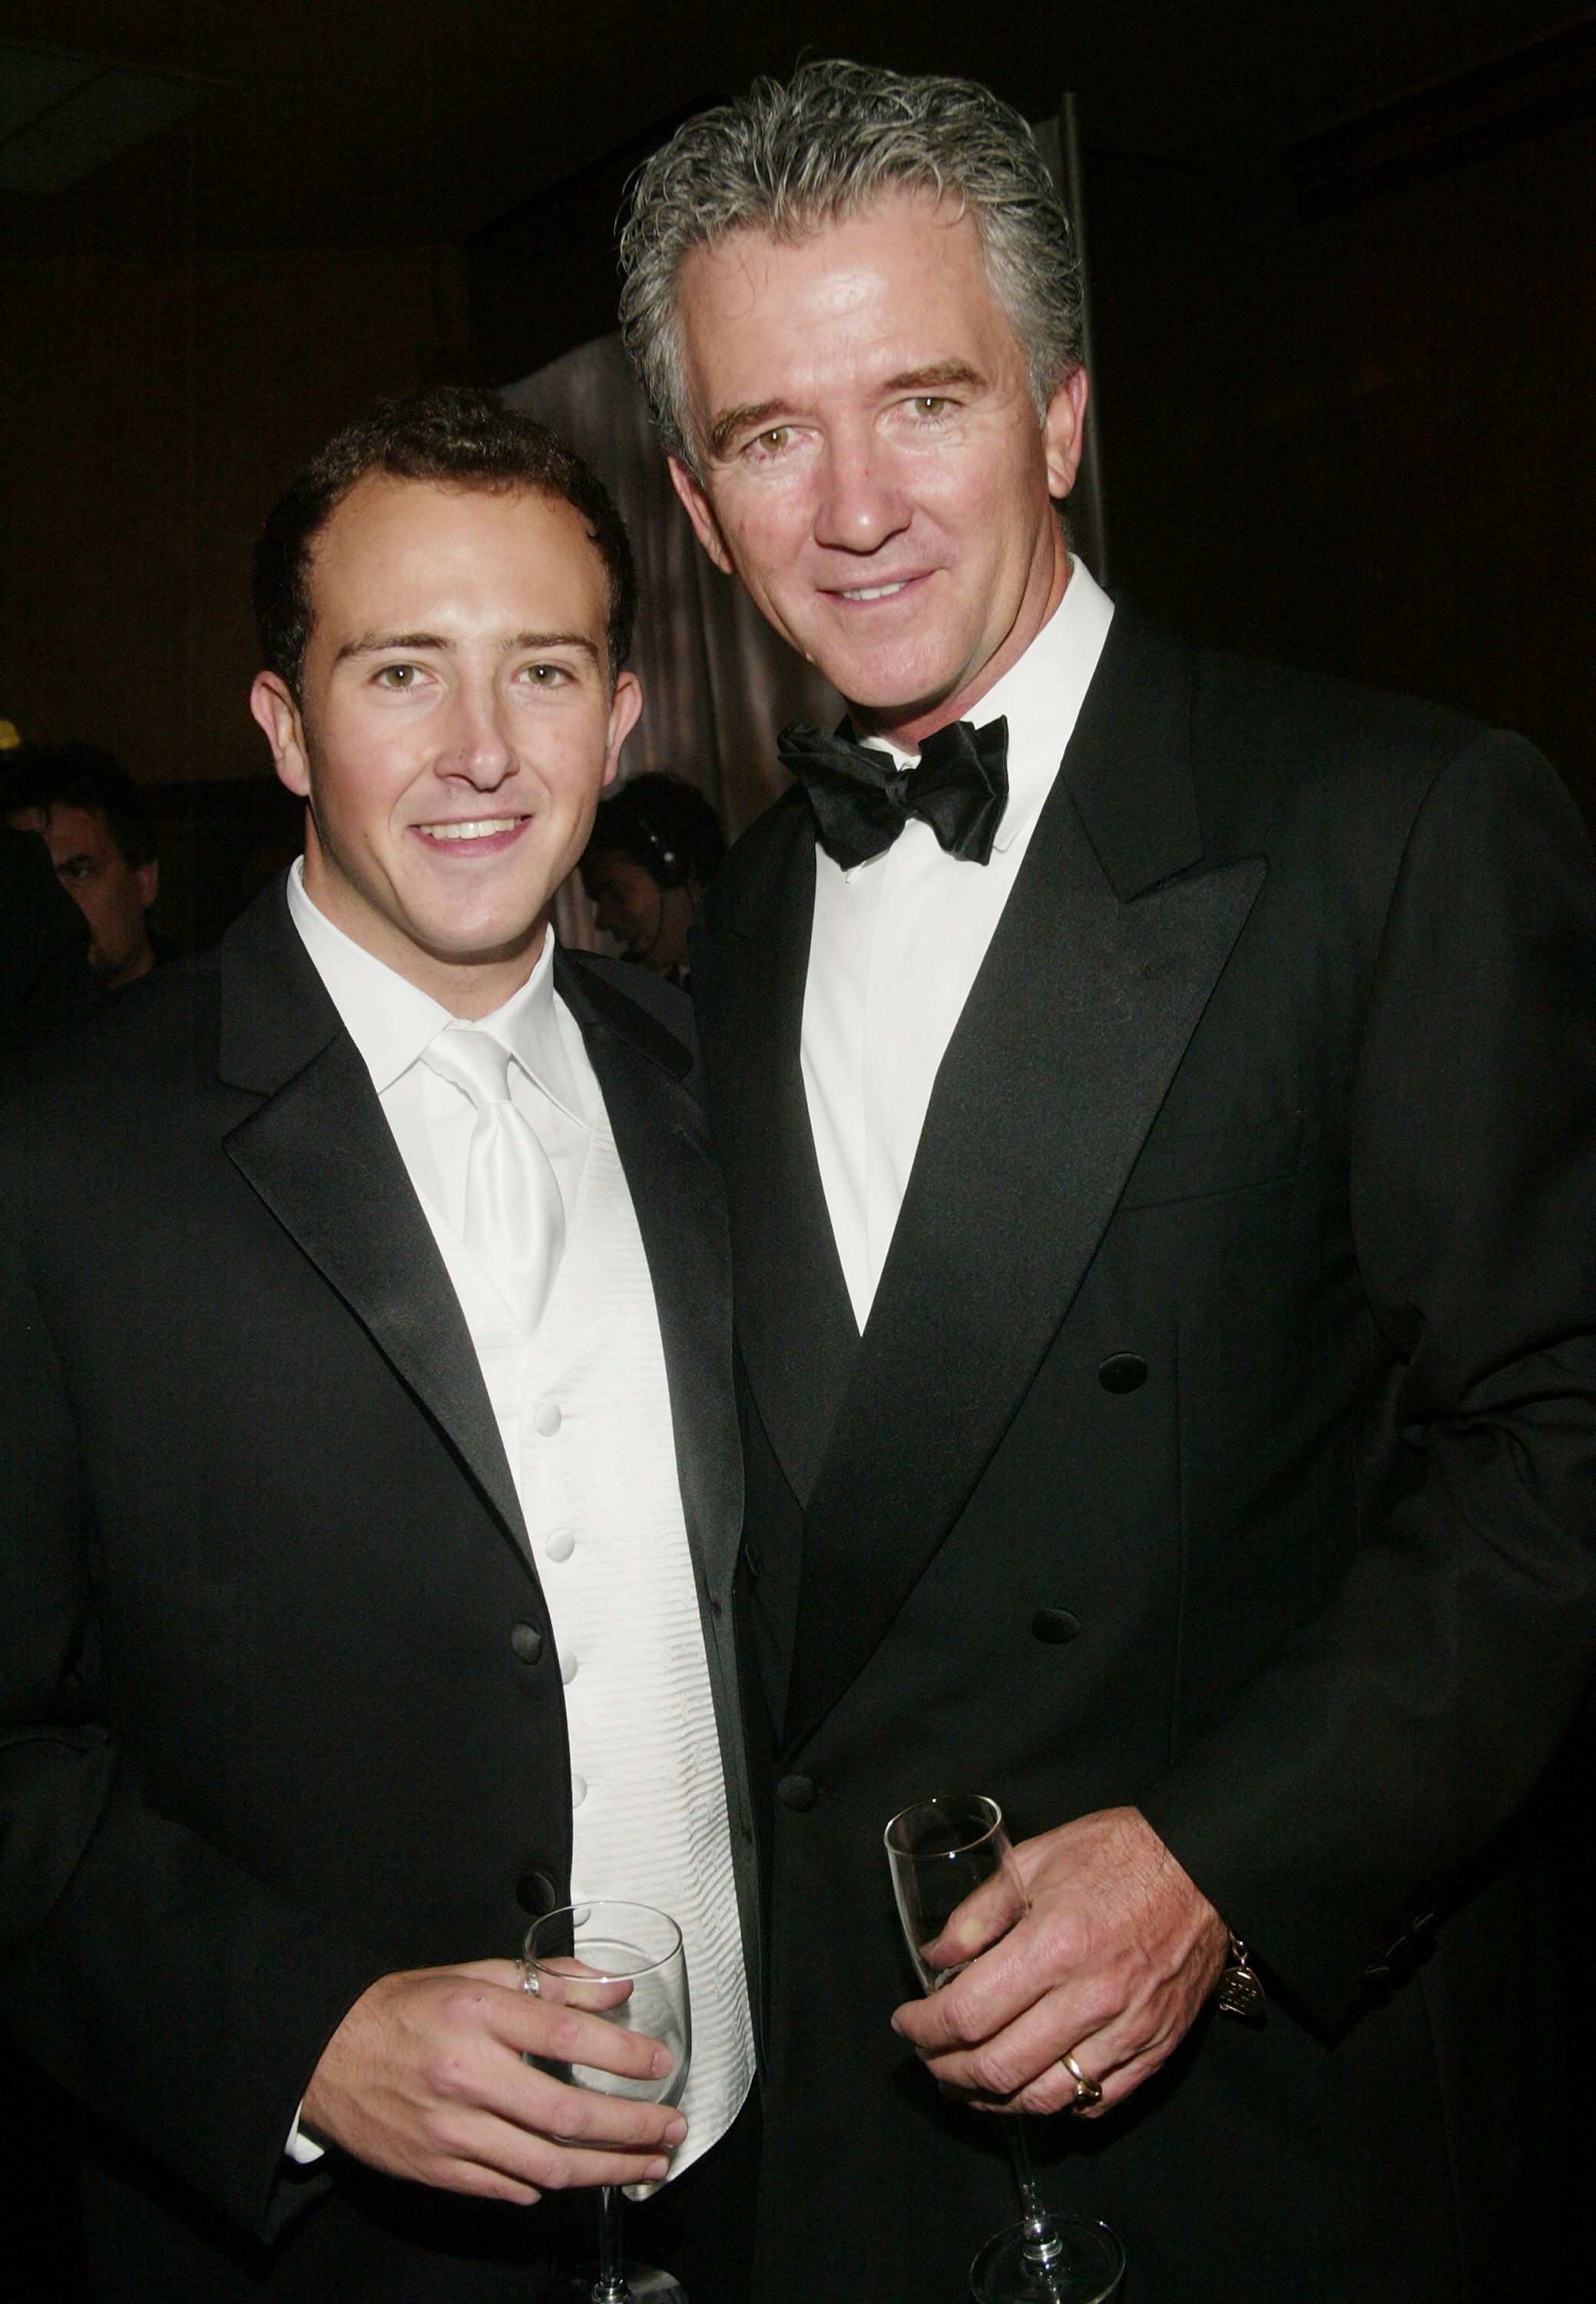 Patrick Duffy and son Conor on November 2, 2003 in New York City | Source: Getty Images